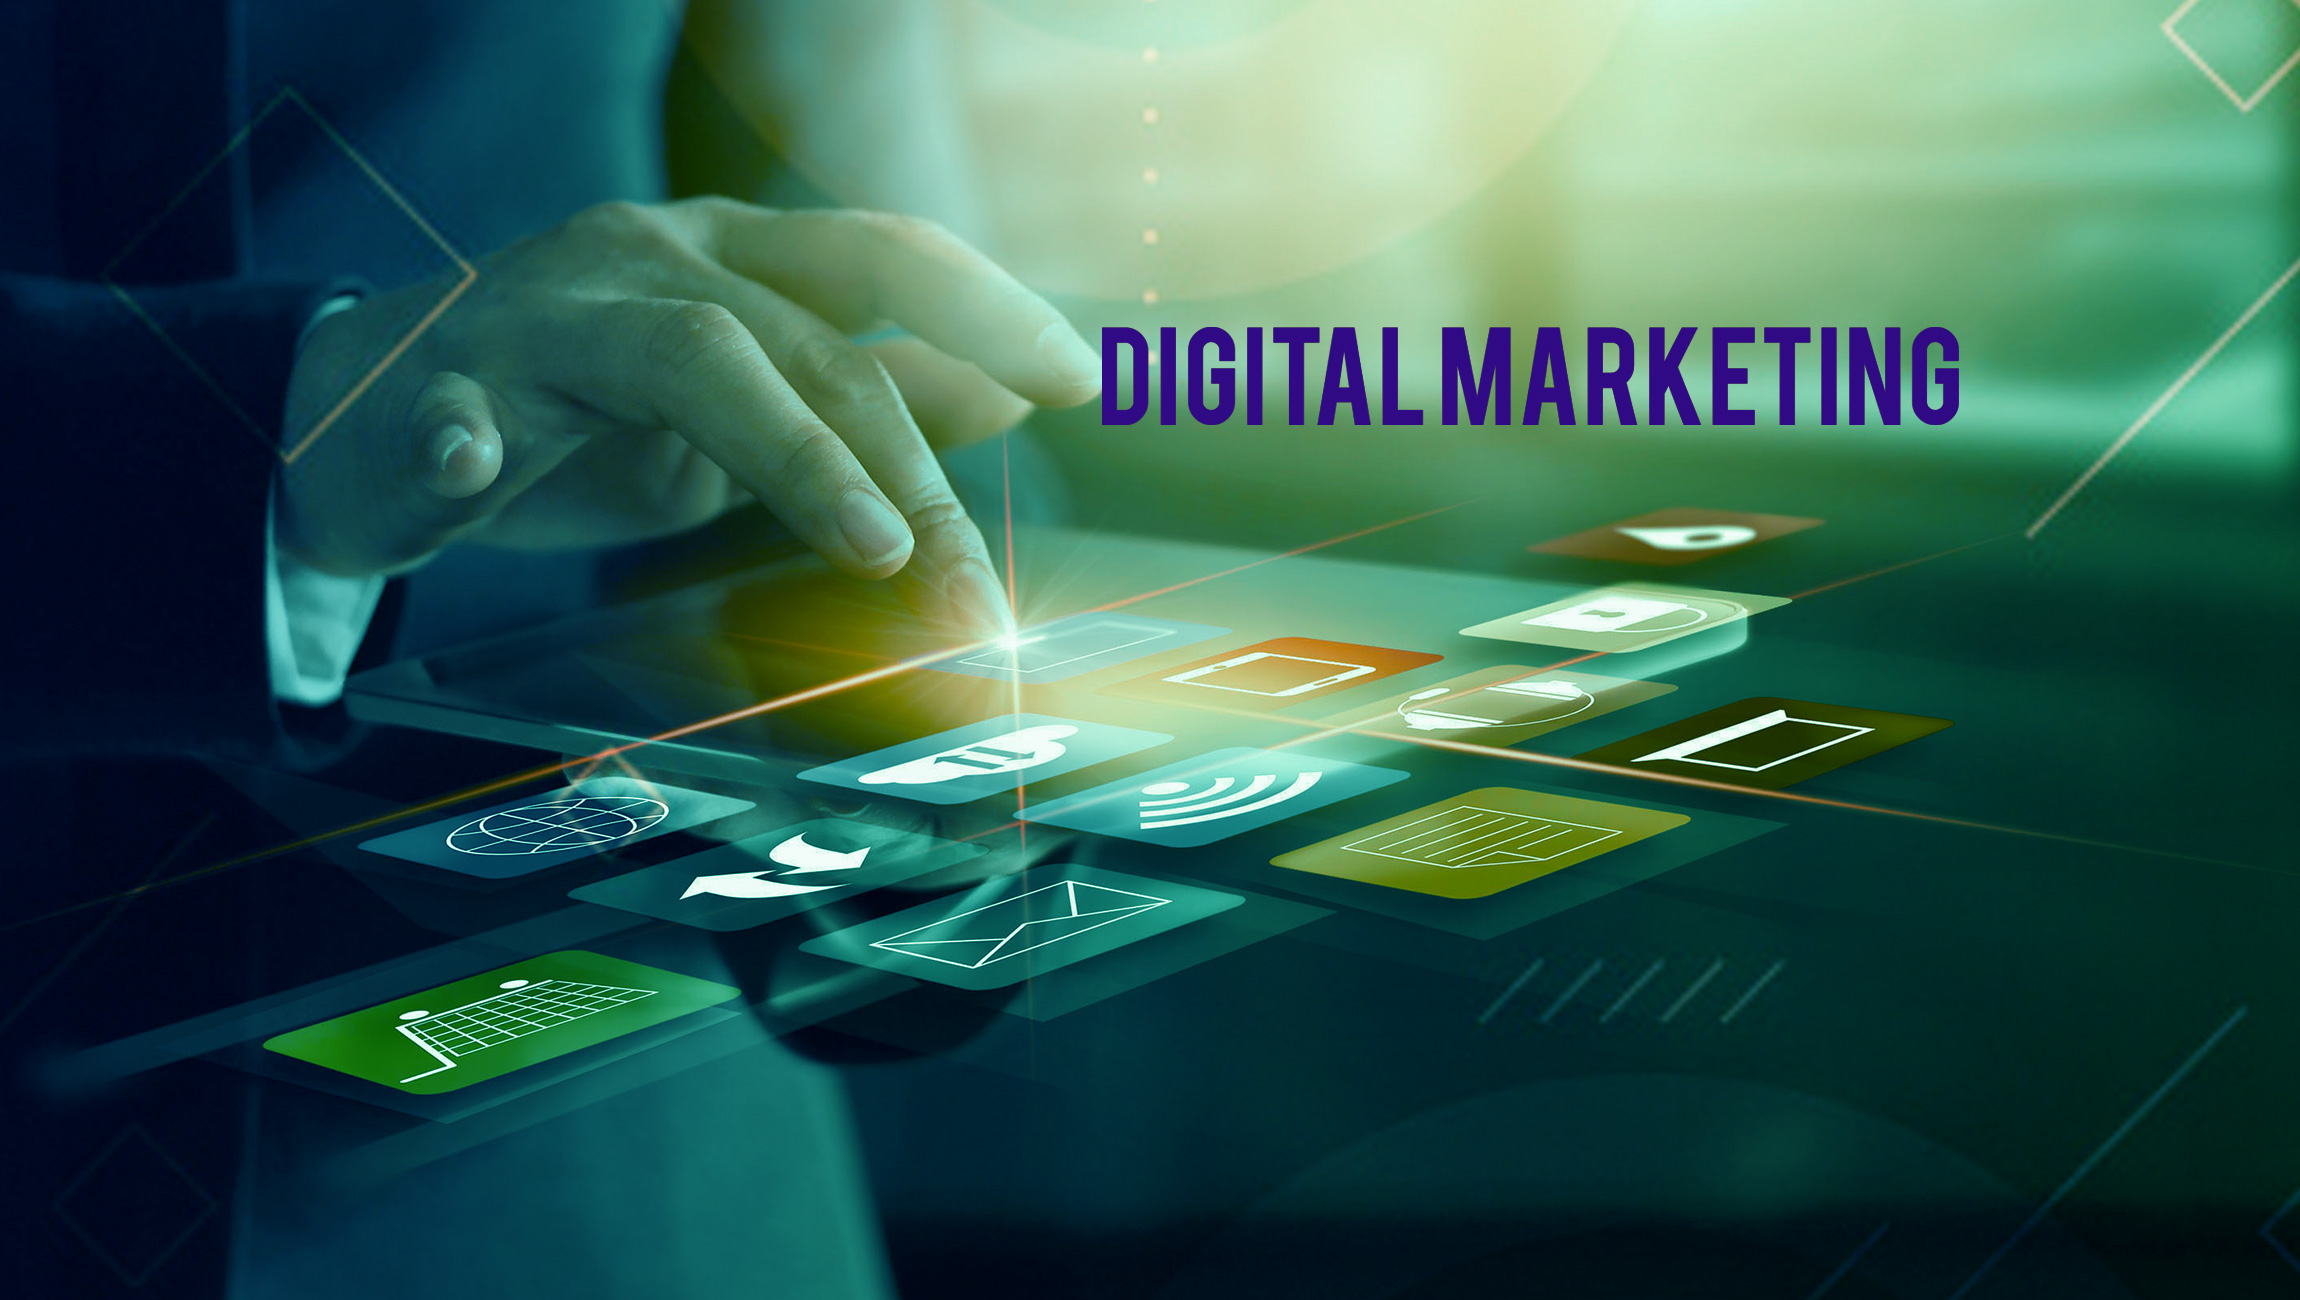 What is Digital Marketing? How to Find a Job